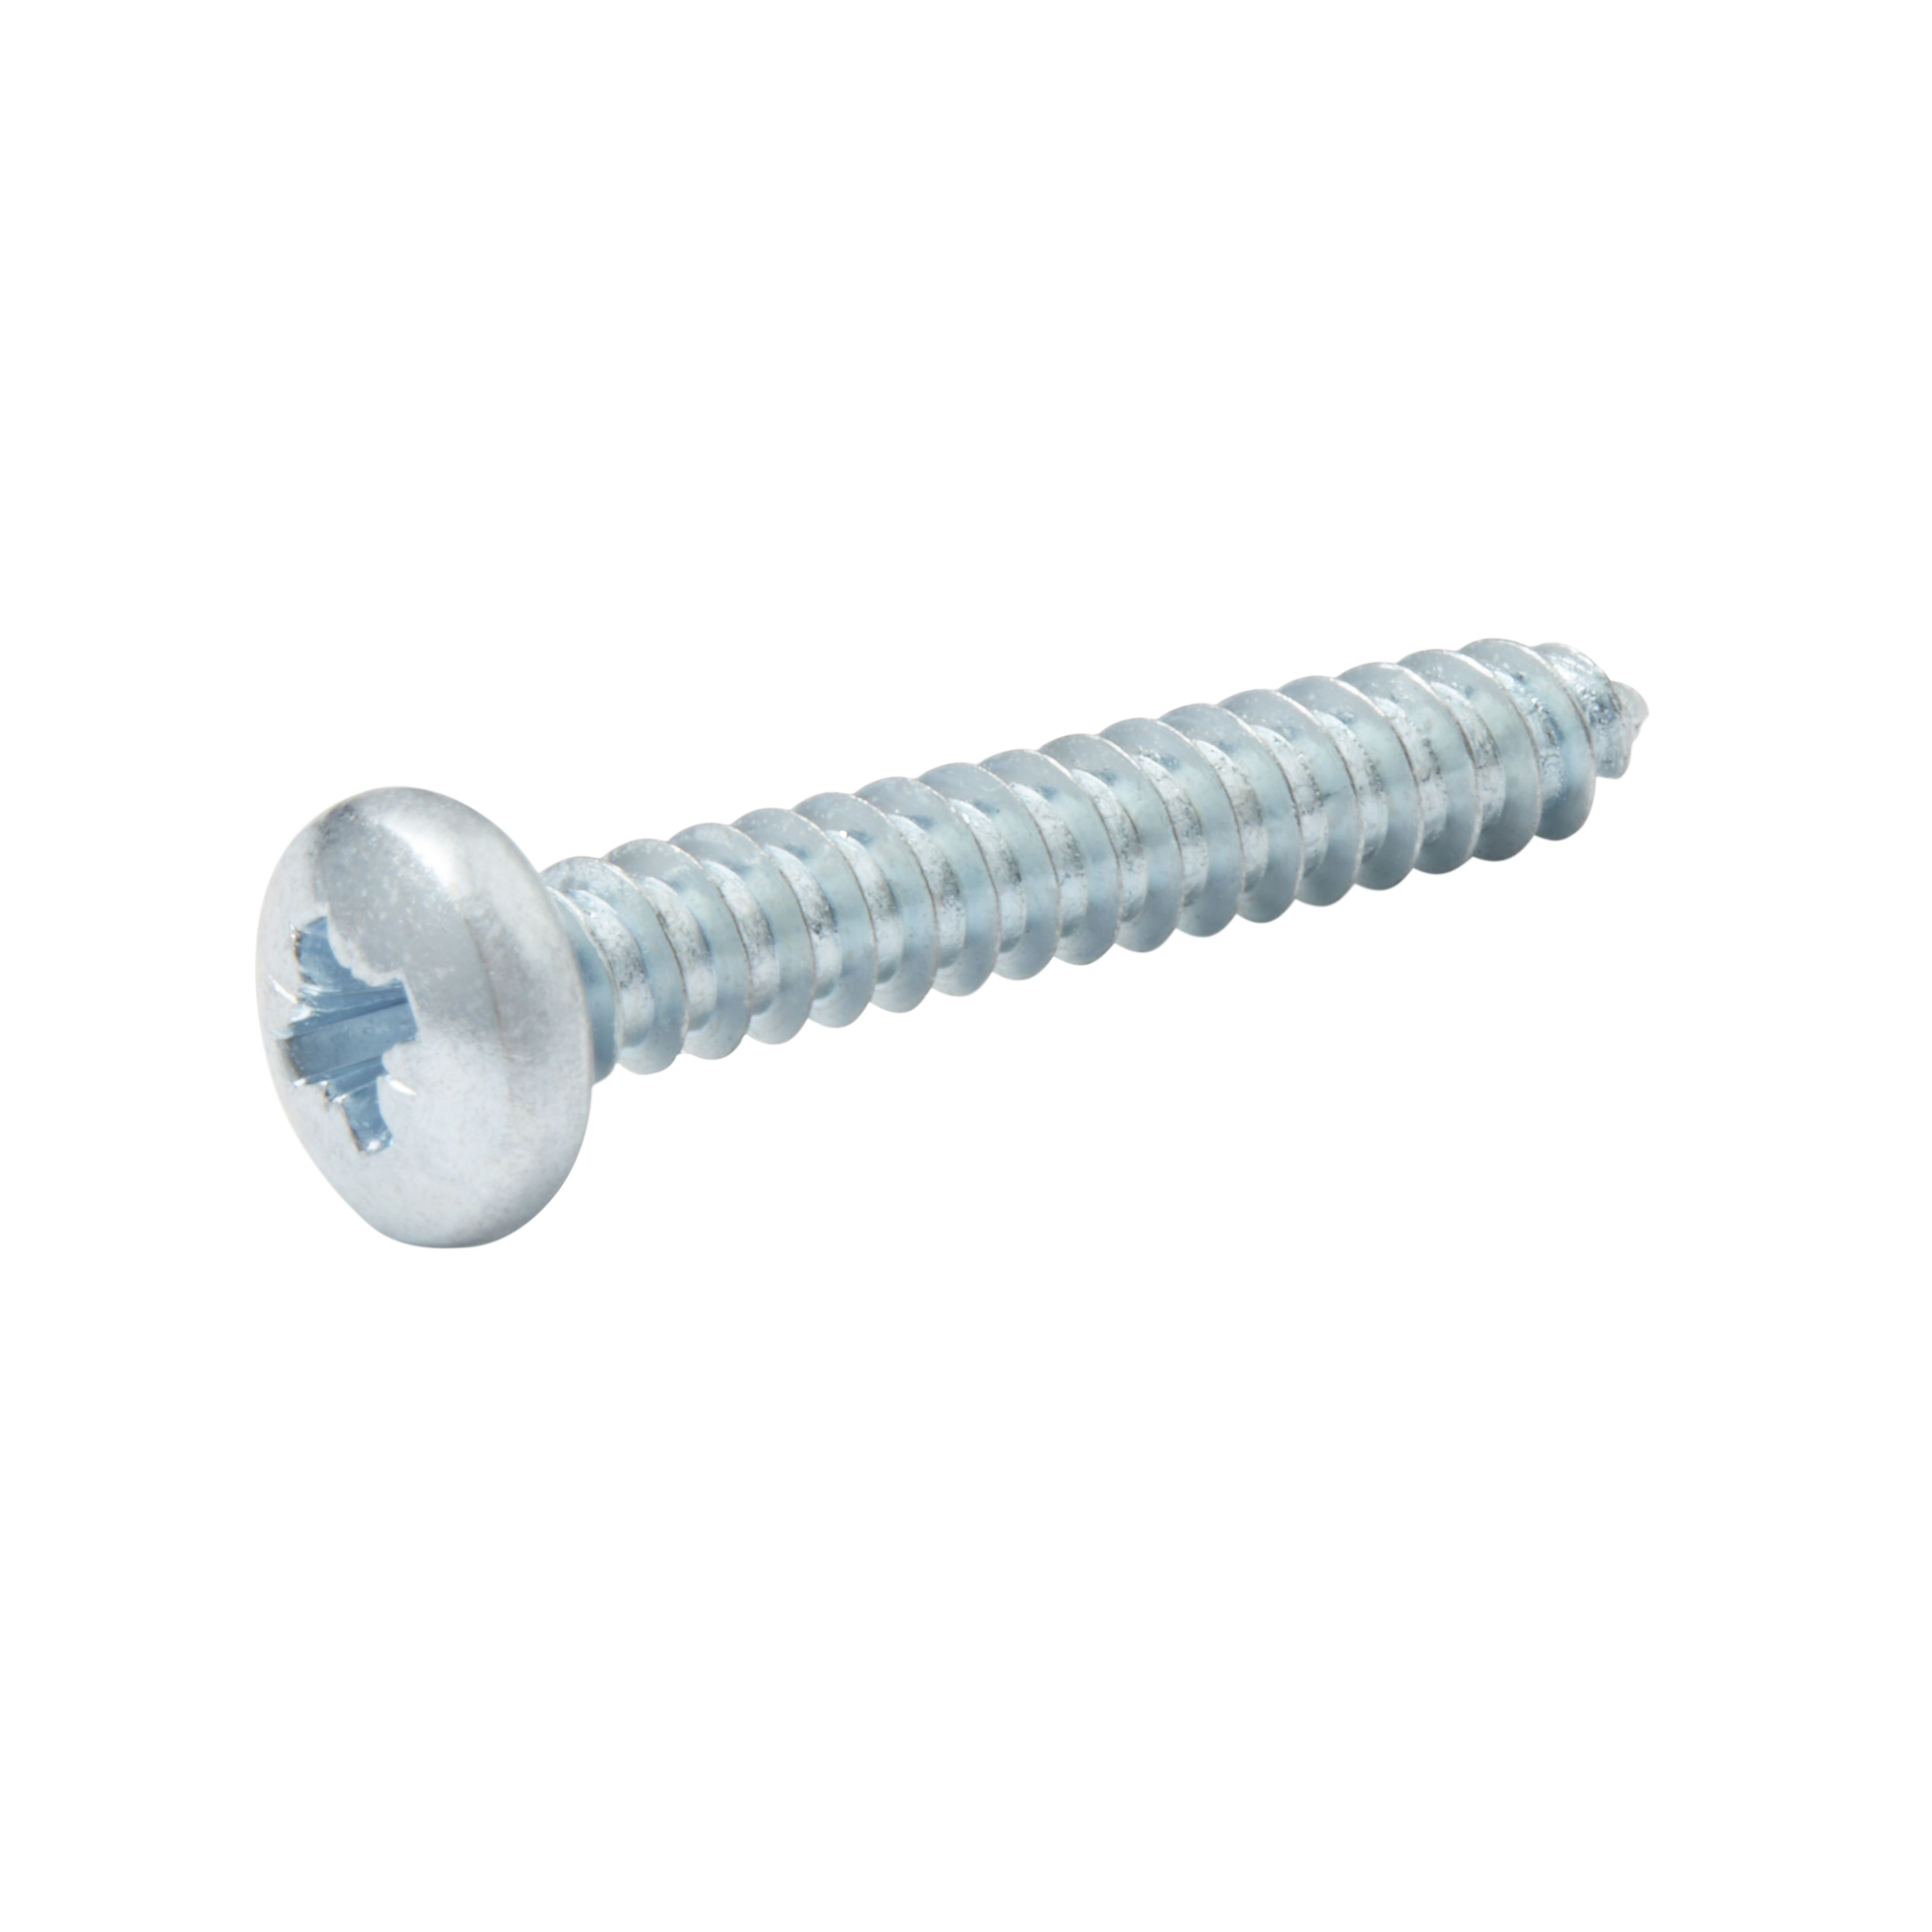 Diall PZ Pan head Zinc-plated Hardened steel Self-drilling screw (Dia)4.8mm (L)32mm, Pack of 25